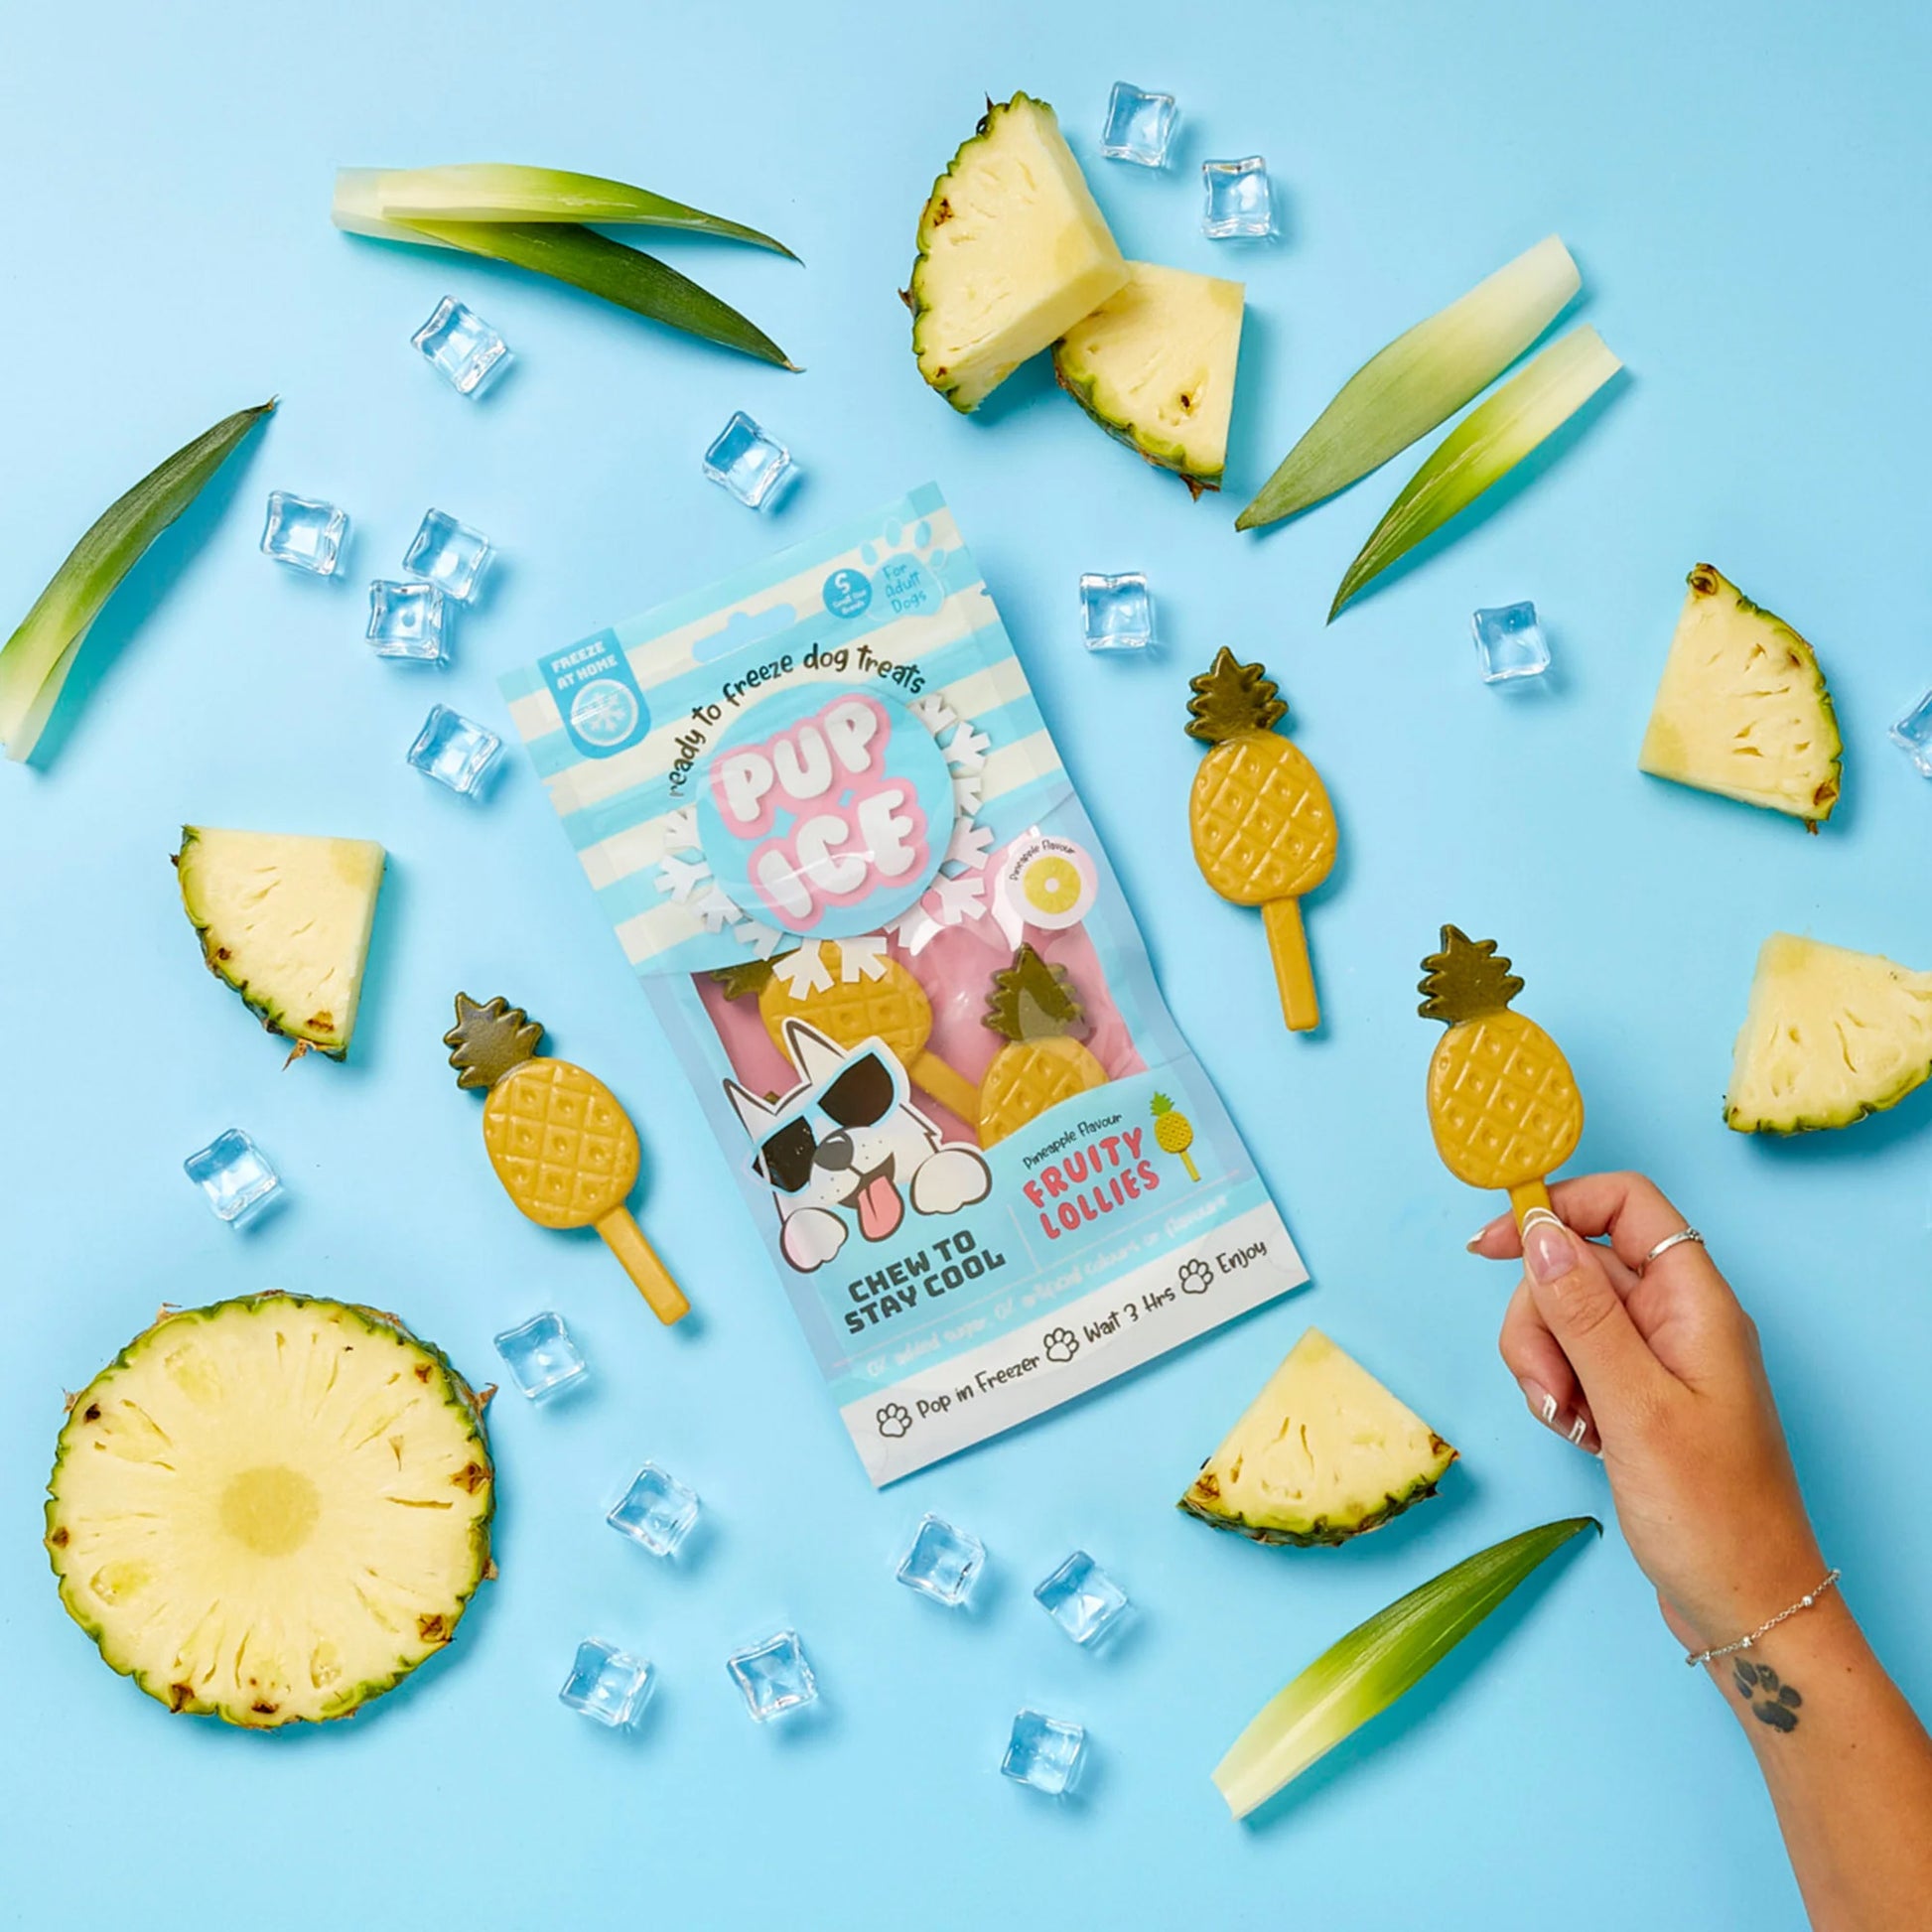 Pup Ice Fruity Lollies Pineapple Ready To Freeze Treat For Adult Dog - 90 gm - Heads Up For Tails